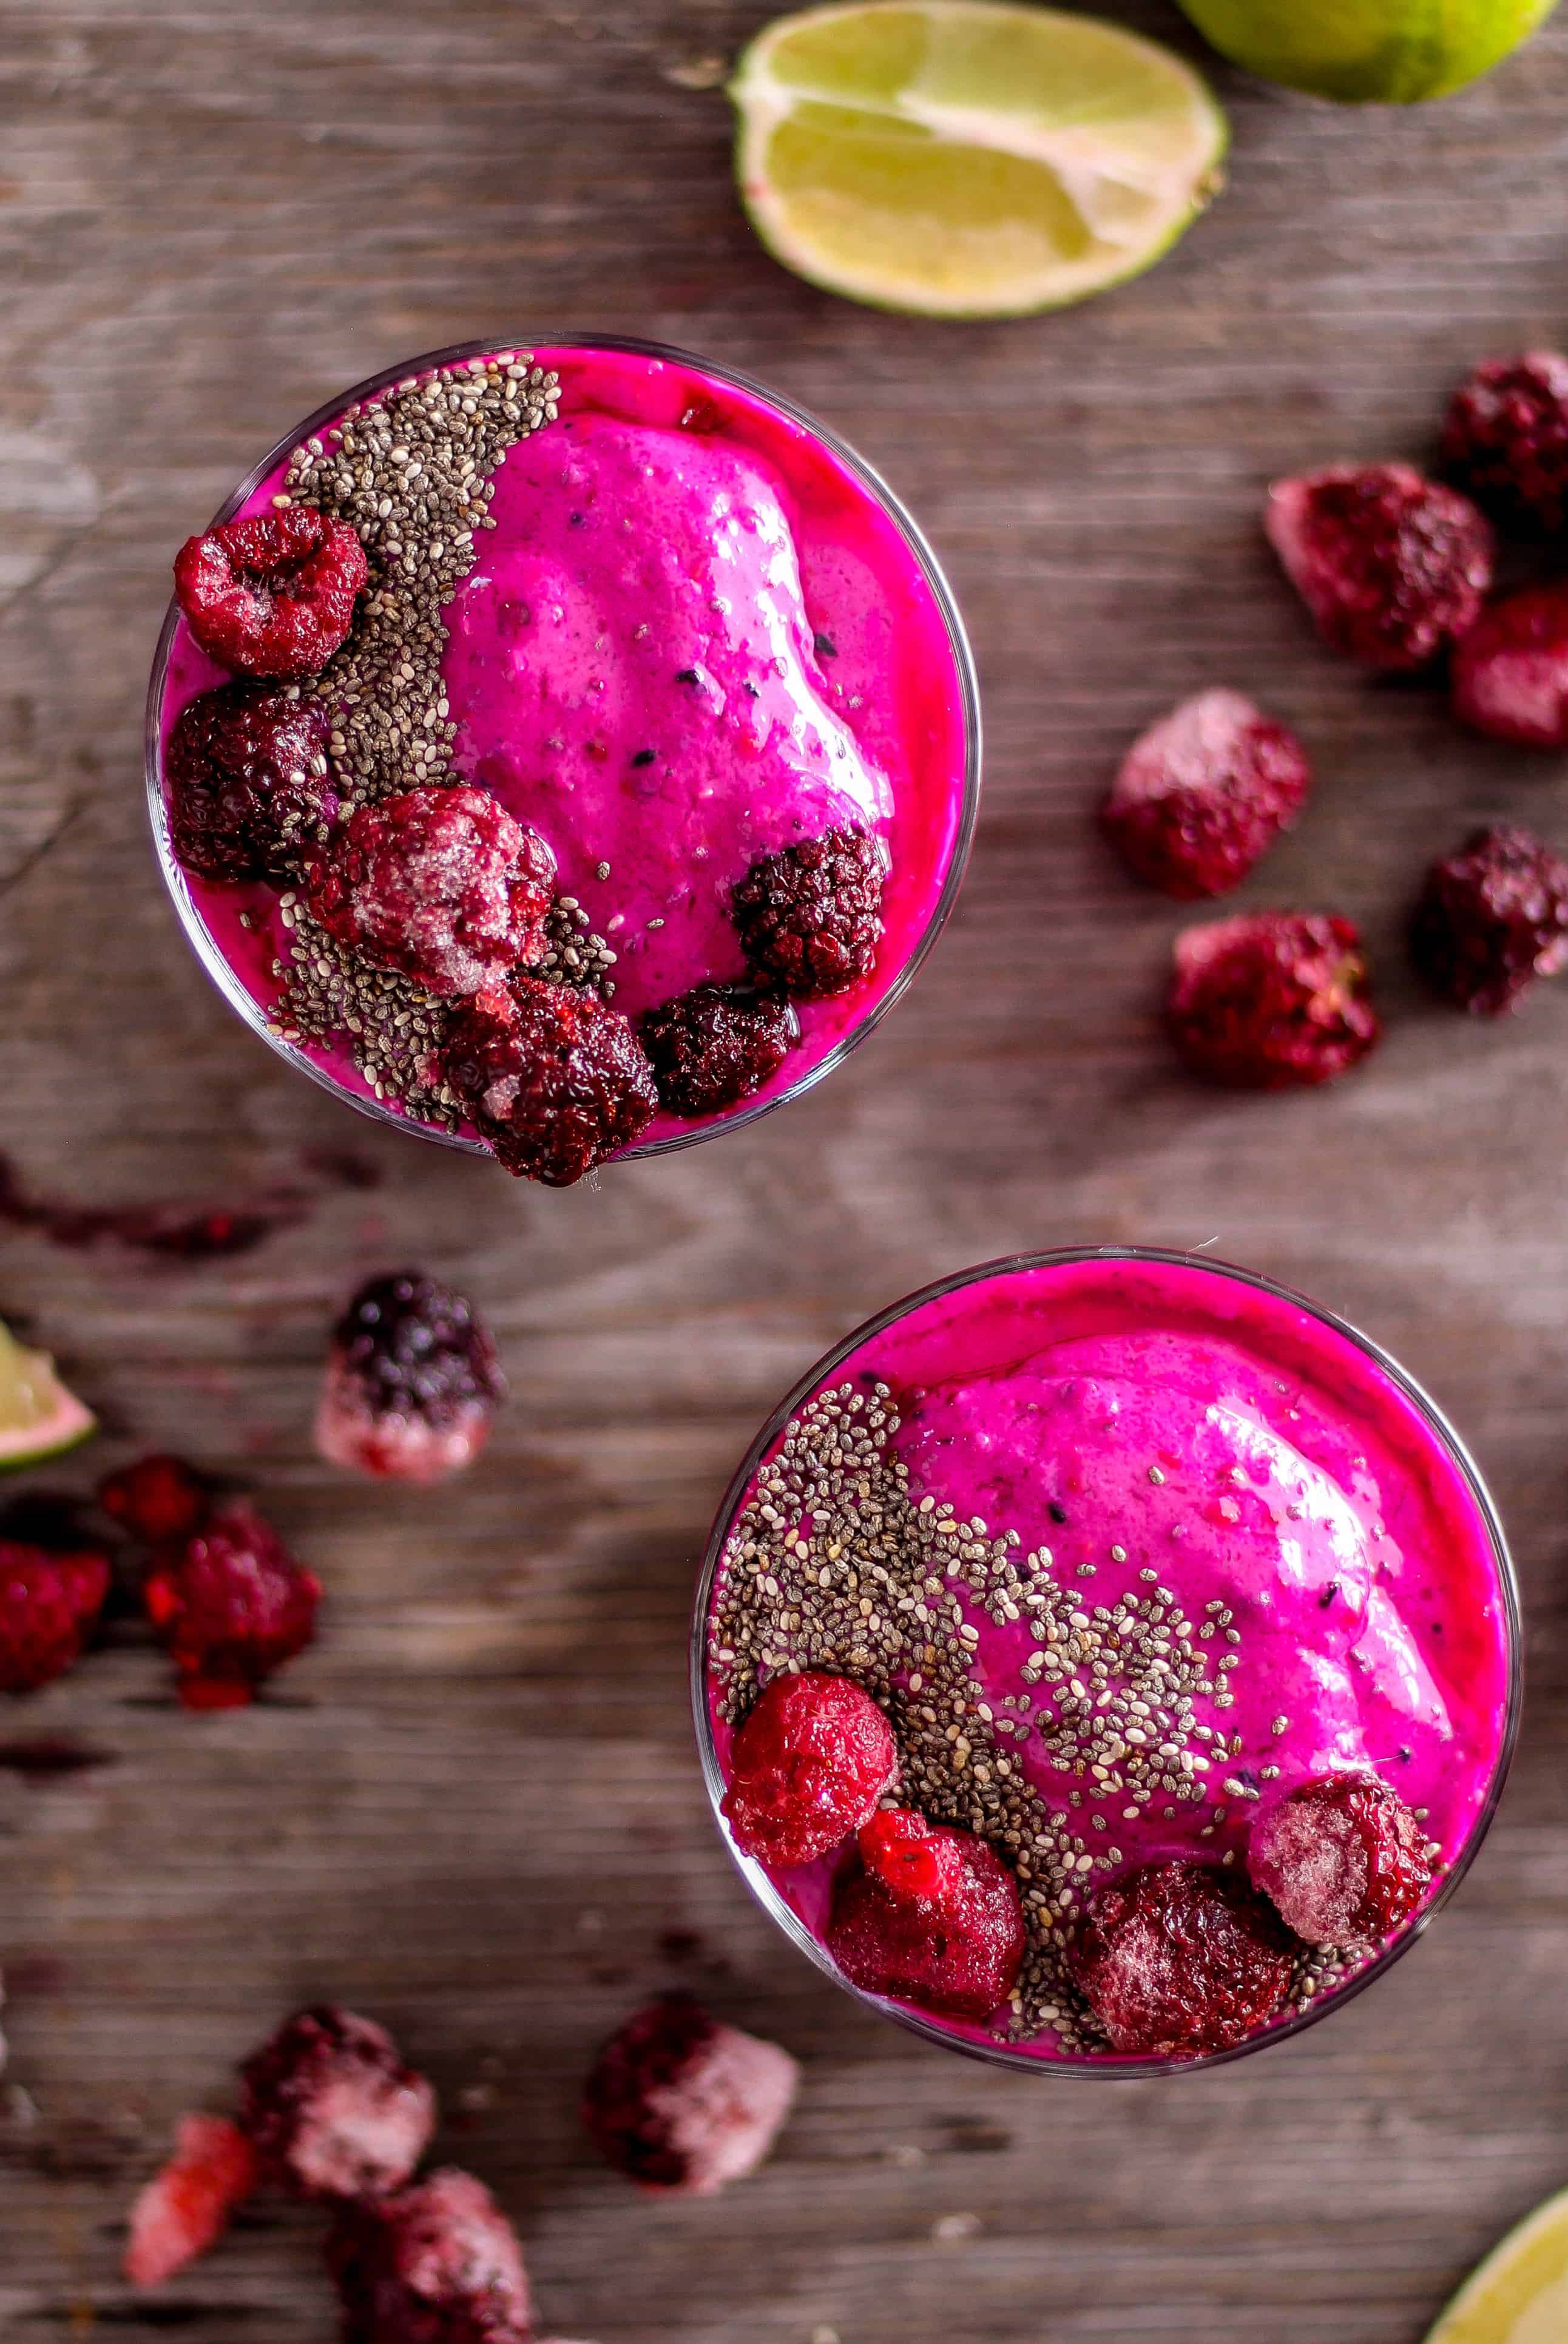 Overhead image of hot pink smoothies with berries and lime.